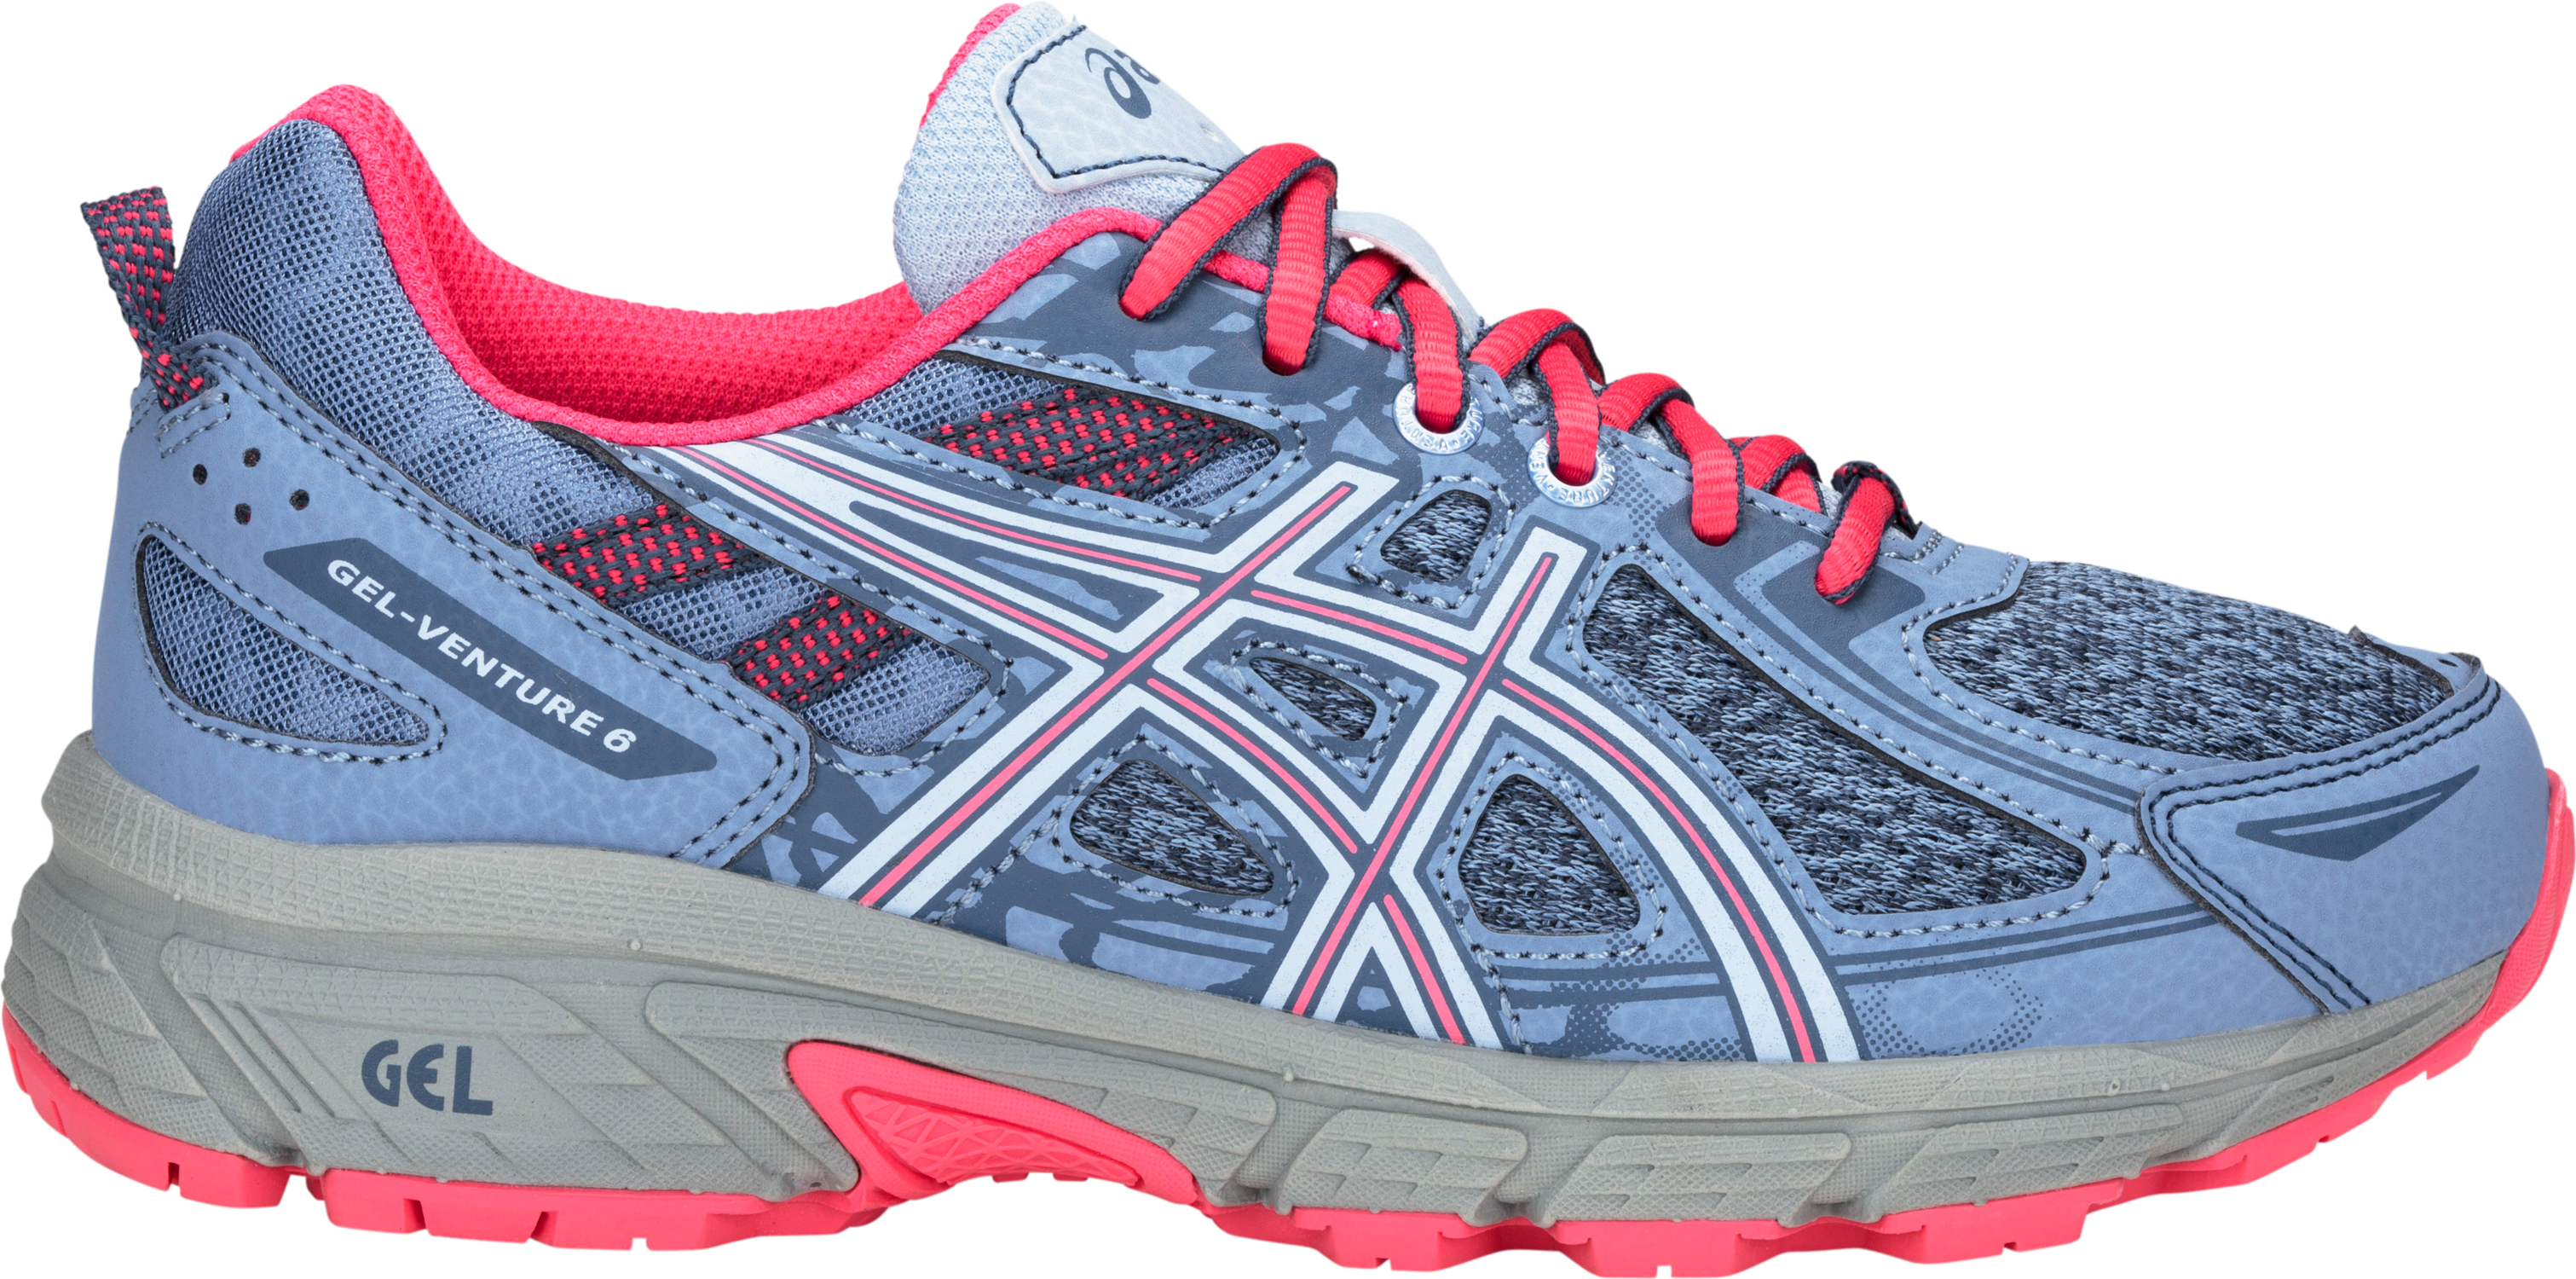 Asics Gel-venture 6 Gs Lace Blue Harmony/pink Cameo - Asics Venture 6 Gs (3022x1500), Png Download